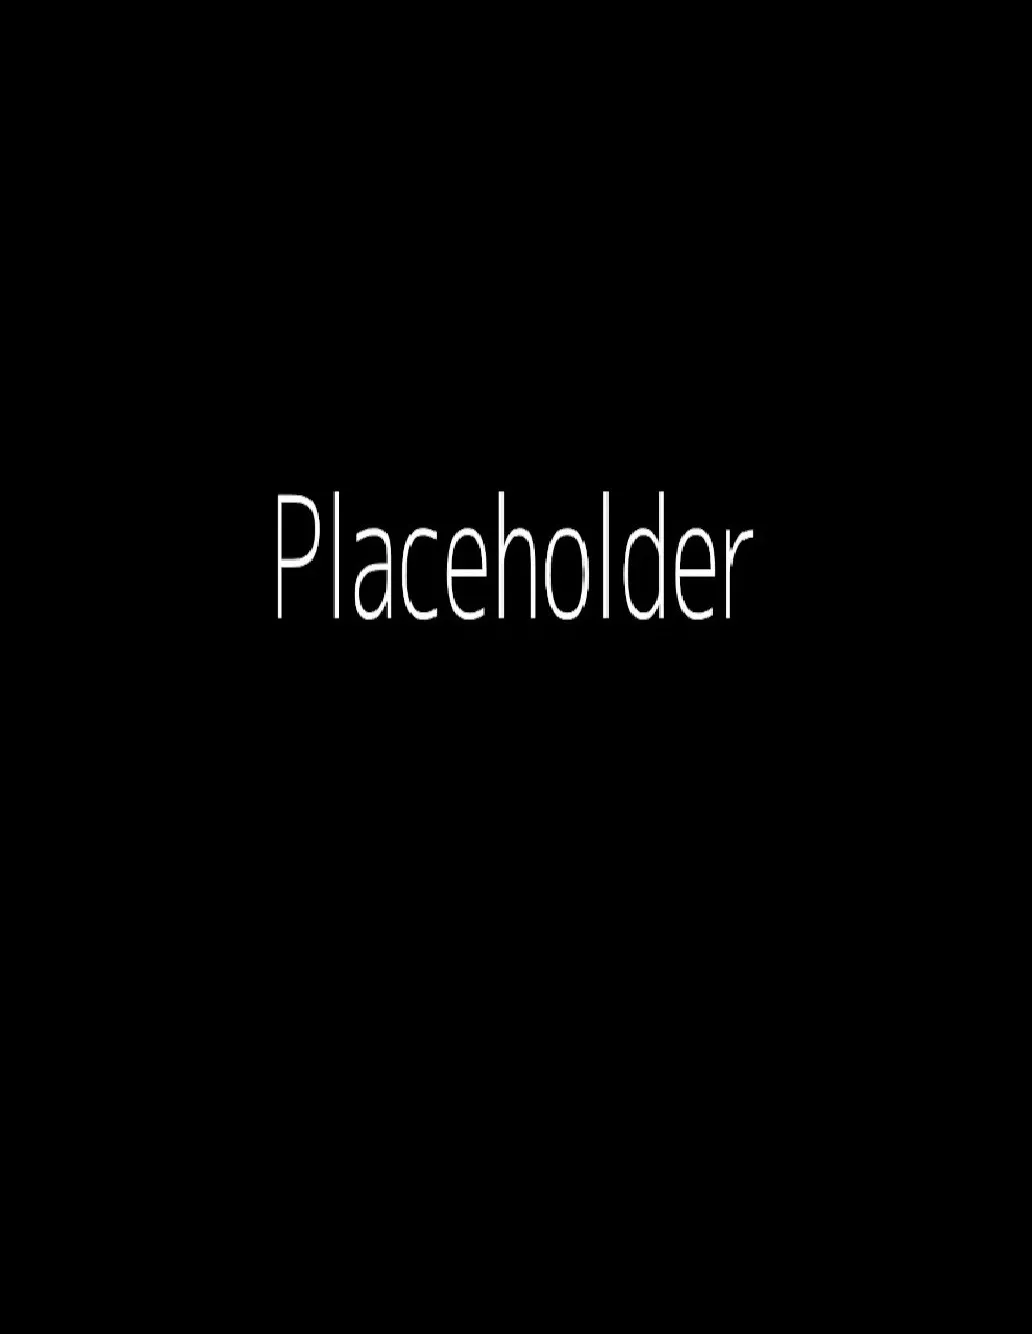 Placeholder 1032x1334